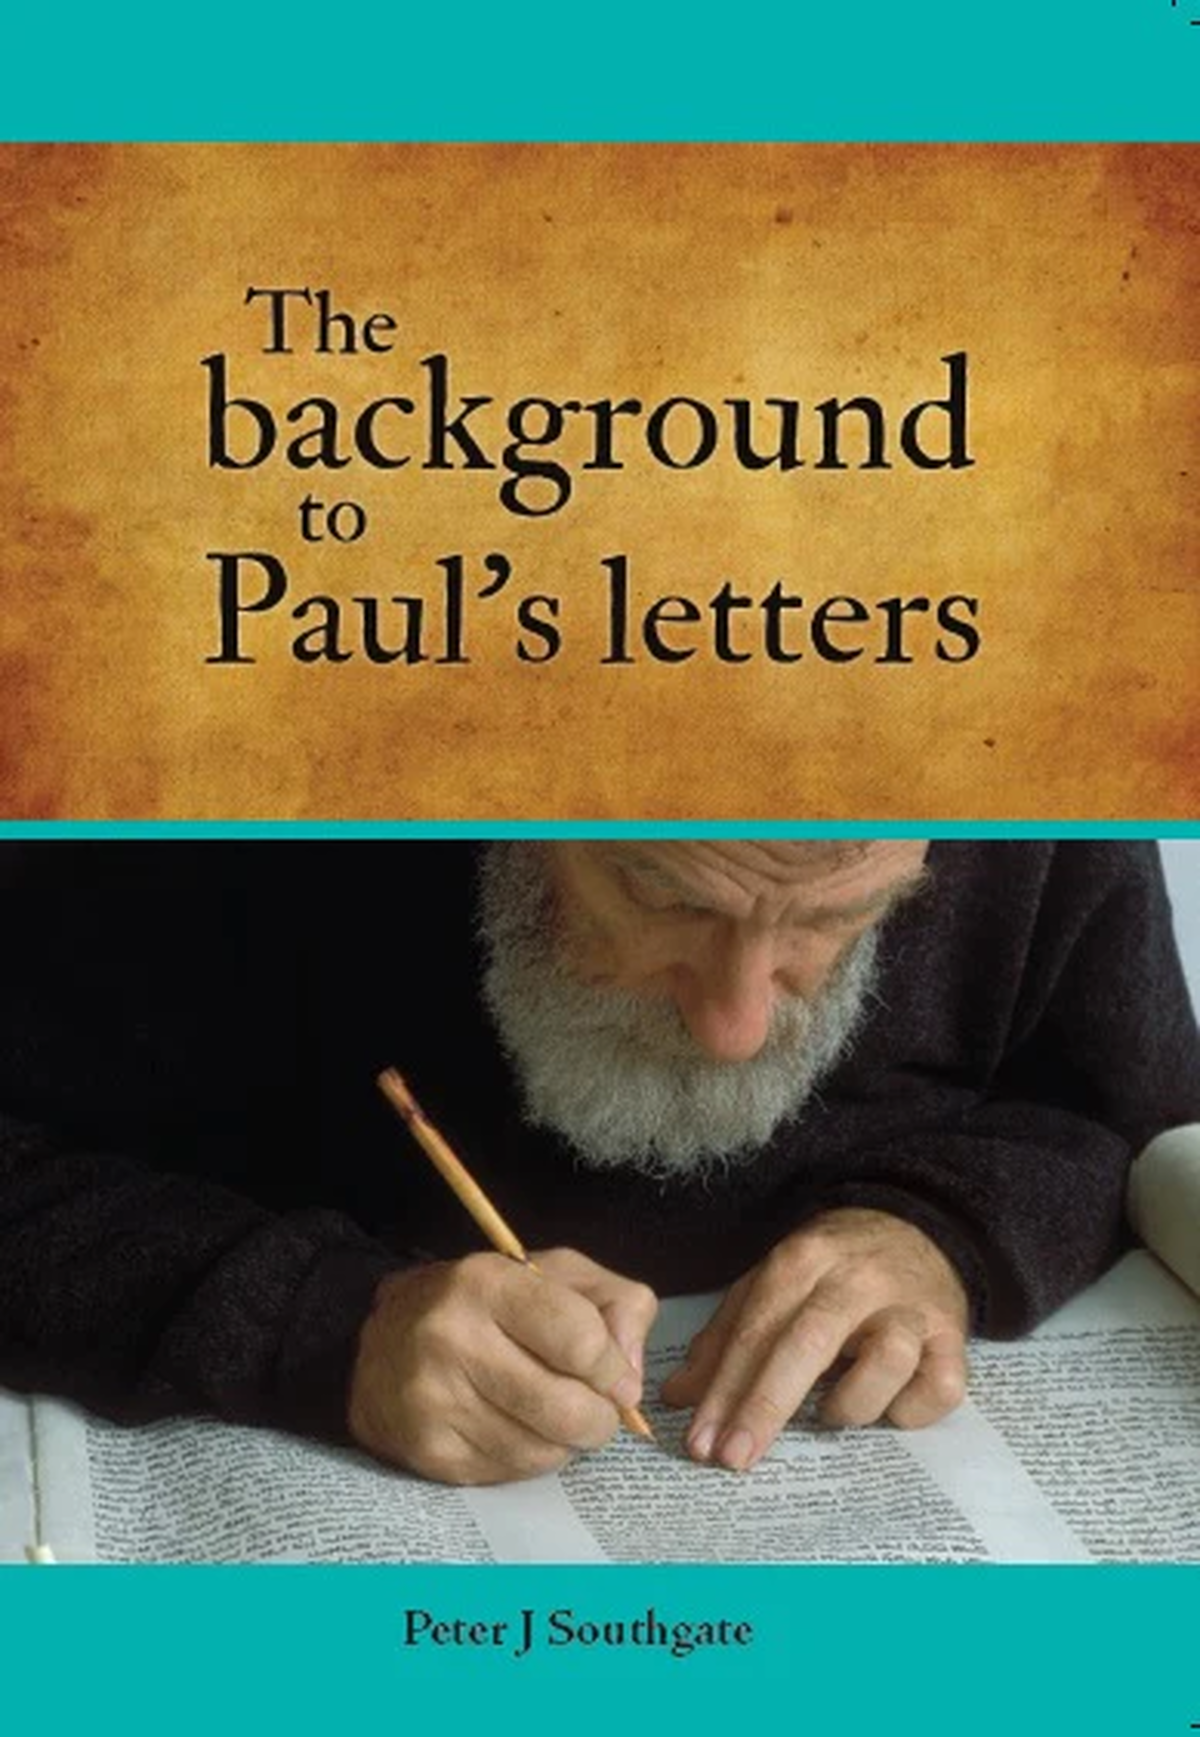 The Background to Paul's letters